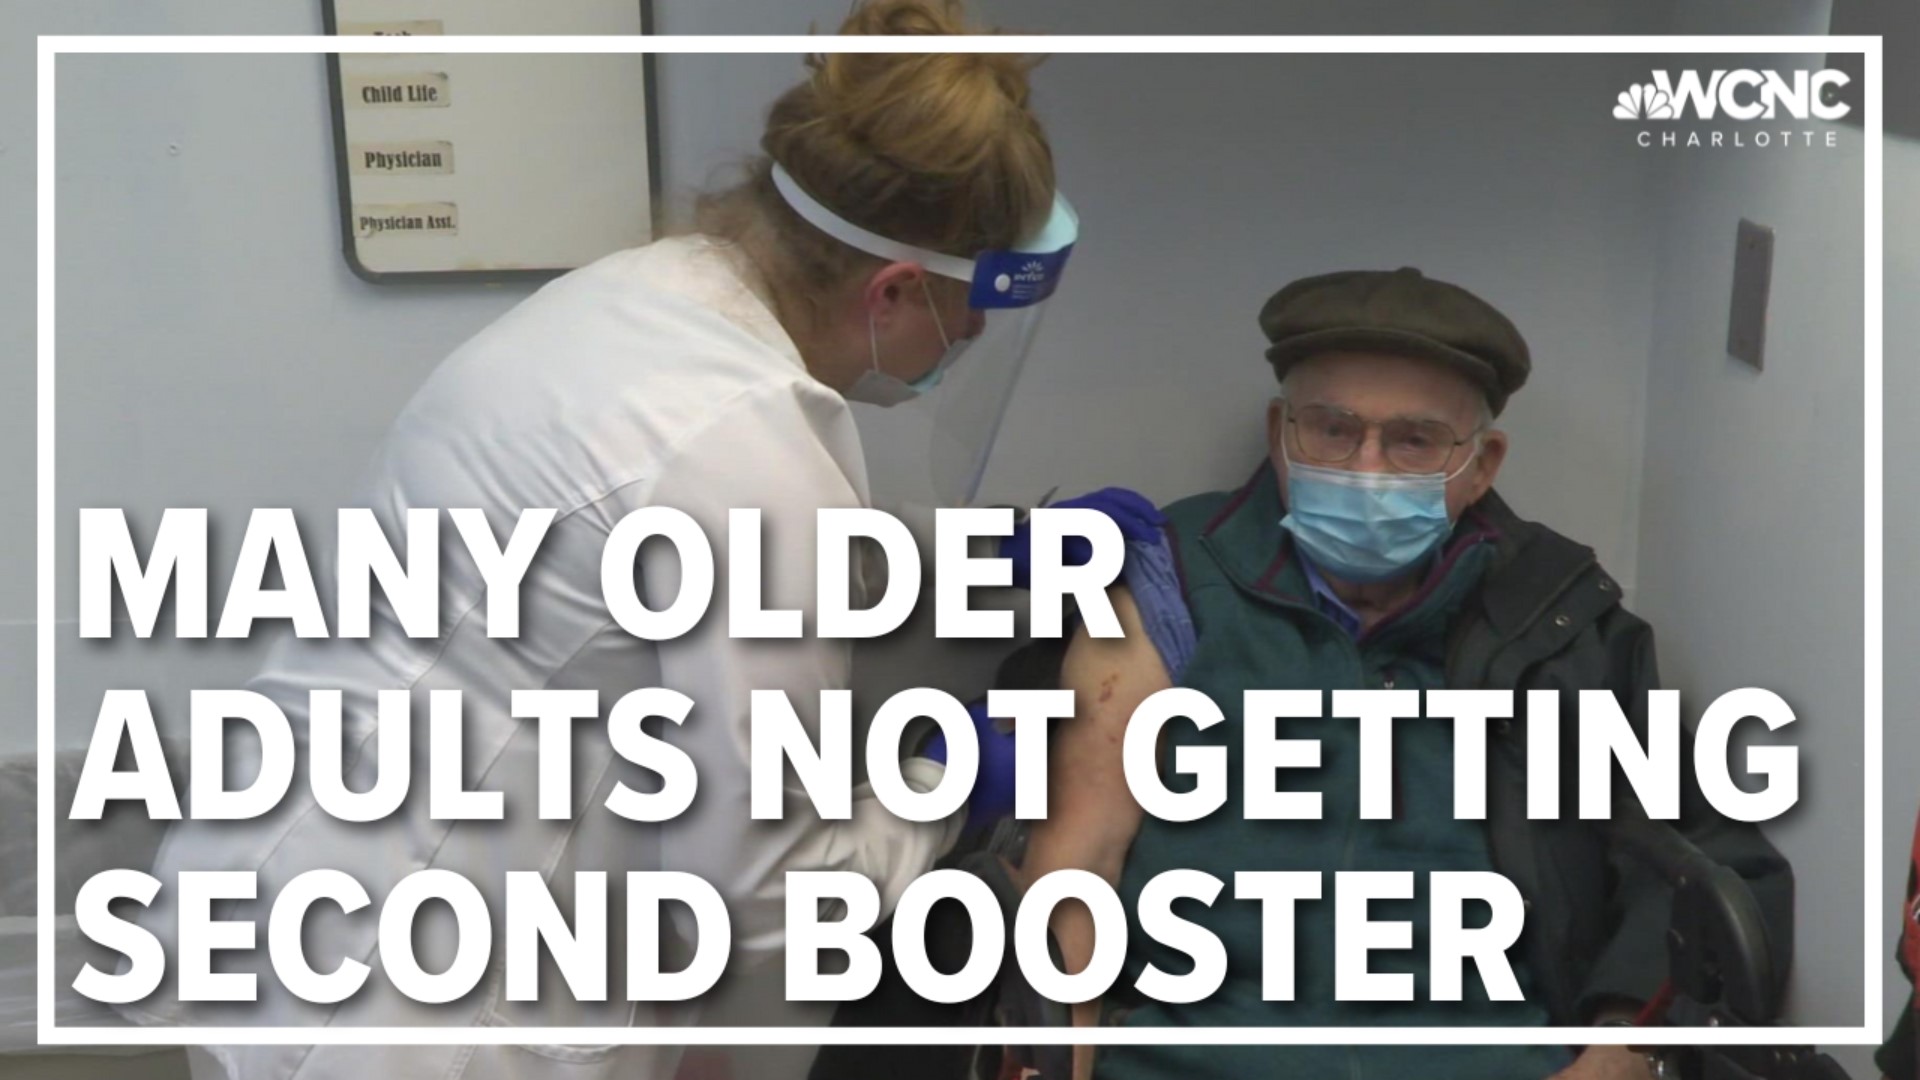 More than 700,000 of the new booster shots have been given in the state, but health experts say it's not enough to protect our most vulnerable populations.